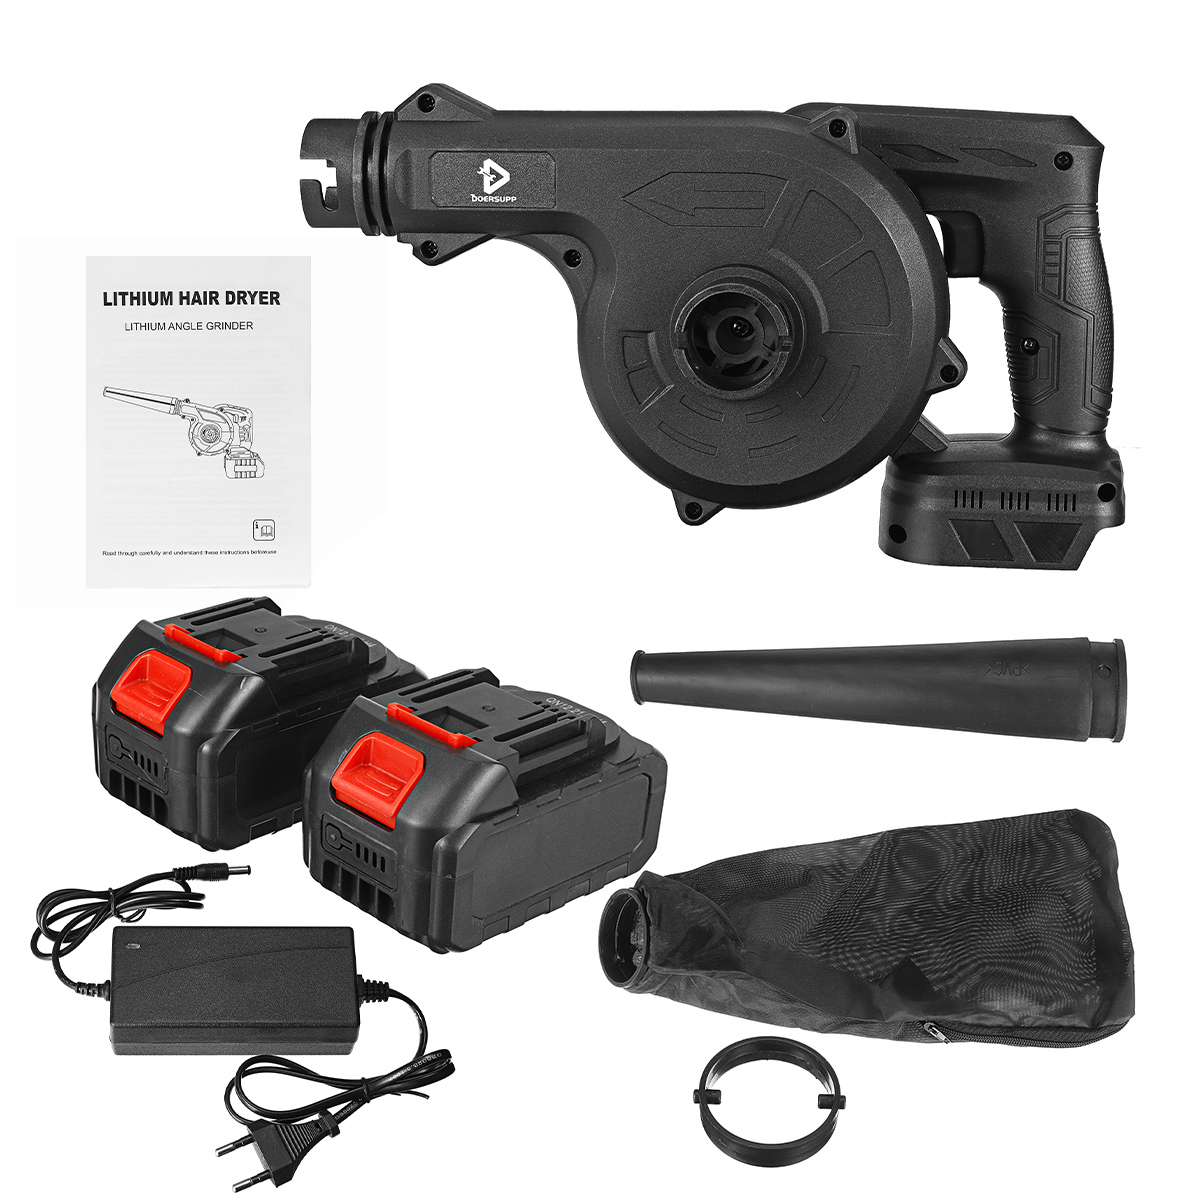 Doersupp-21V-1000W-Cordless-Electric-Air-Blower-Vacuum-Suction-Cleaning-Leaf-Blower-Computer-Dust-Co-1863319-13